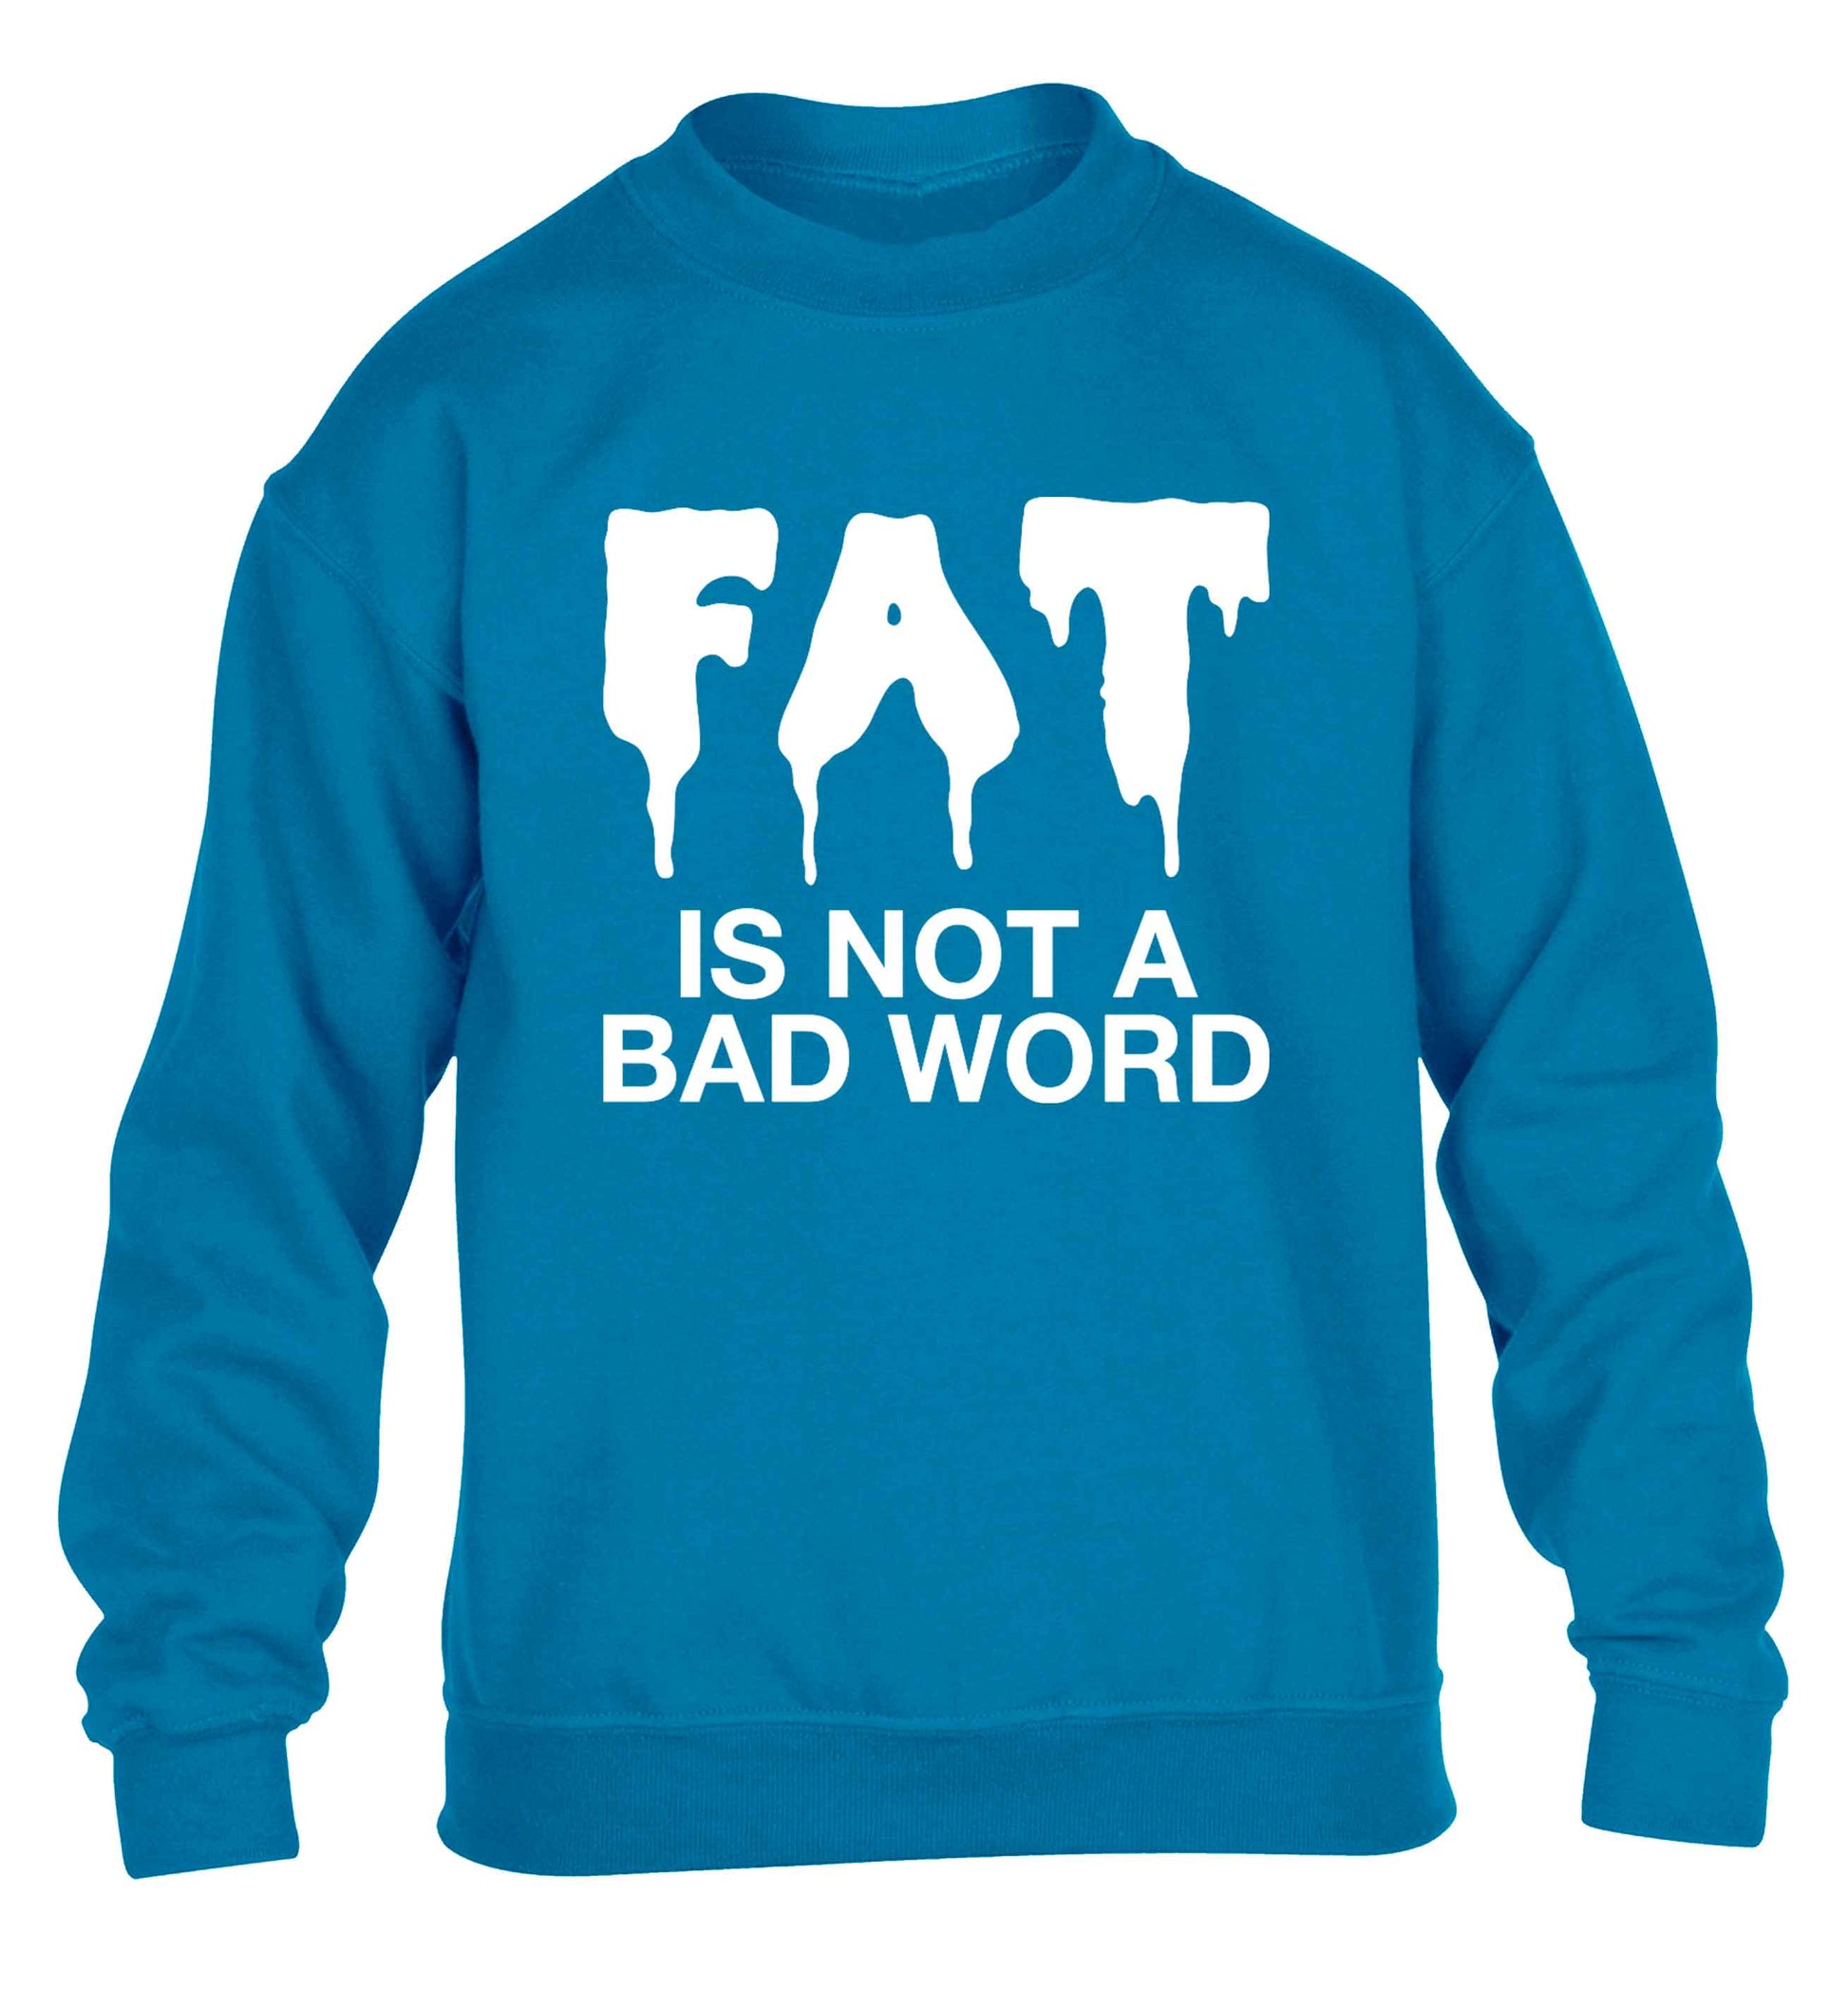 Fat is not a bad word children's blue sweater 12-13 Years